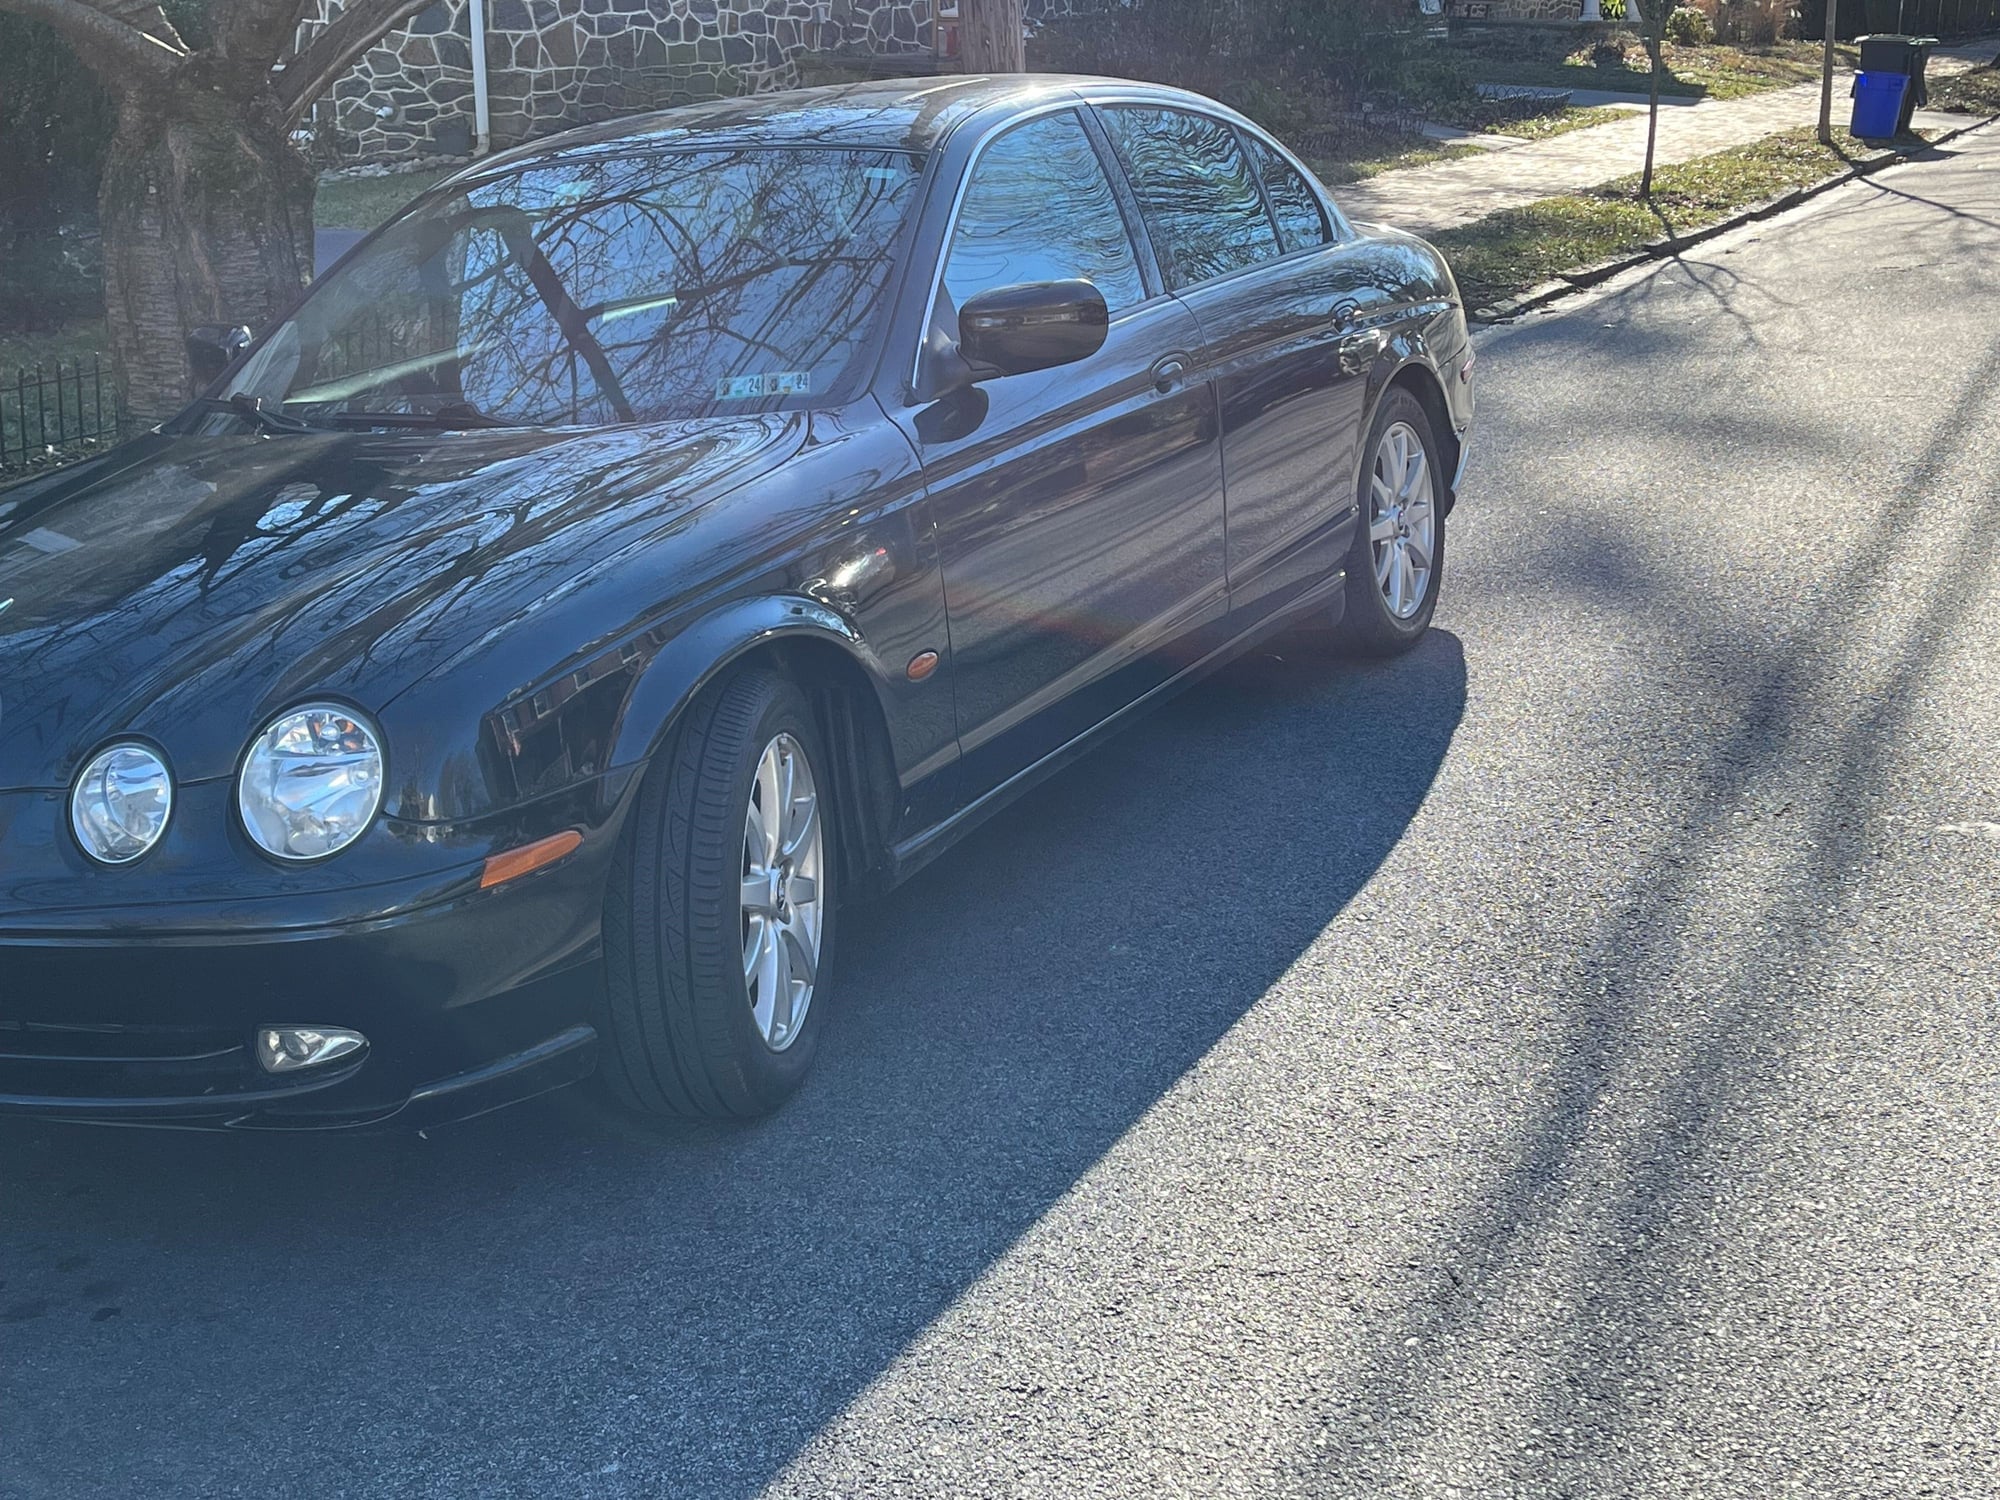 2002 Jaguar S-Type - 2002 Jaguar S-Type in Very Good Condition - $ 4,000 - Used - VIN SAJDA03P02GM36141 - 96,654 Miles - 8 cyl - 2WD - Sedan - Black - West Chester, PA 19380, United States